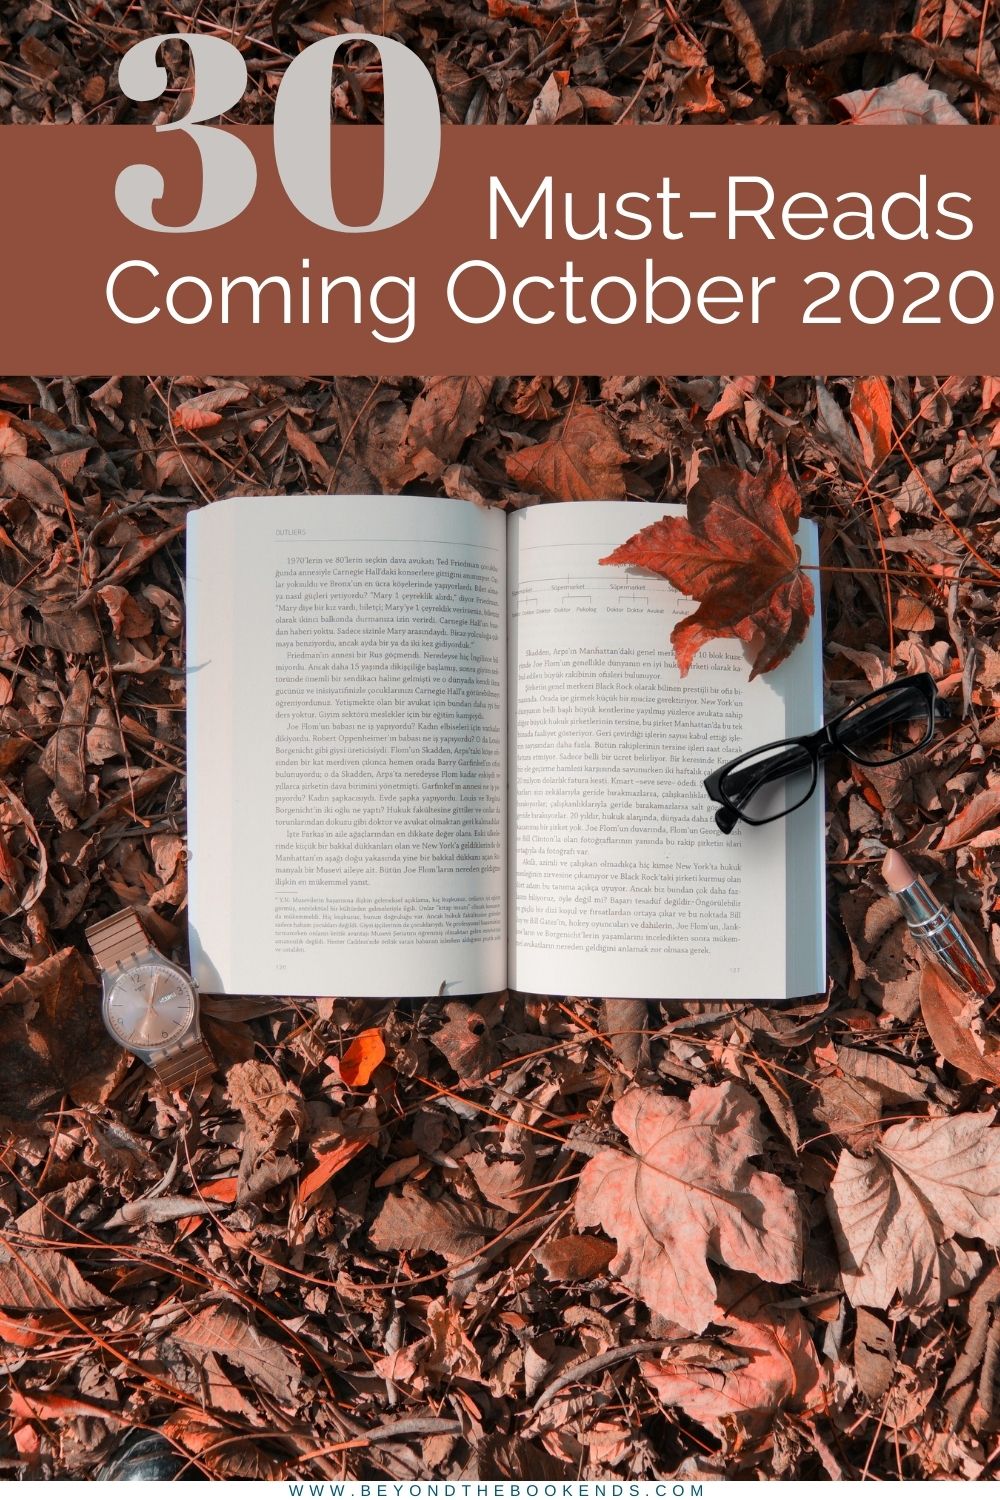 30 Incredible new book releases coming October 2020.